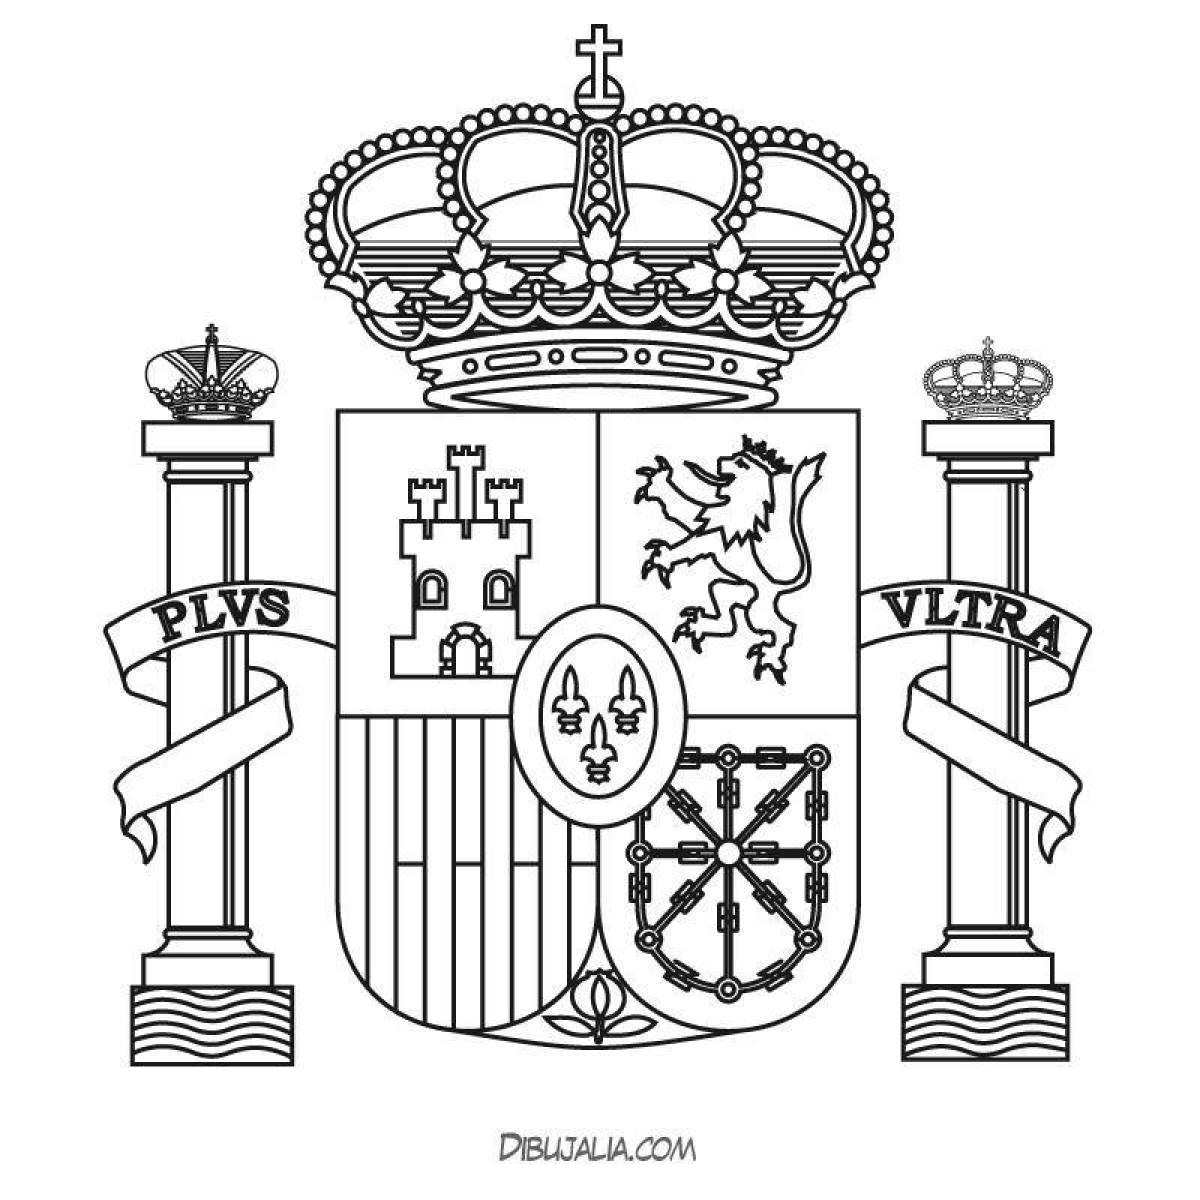 Sweet spain flag coloring page